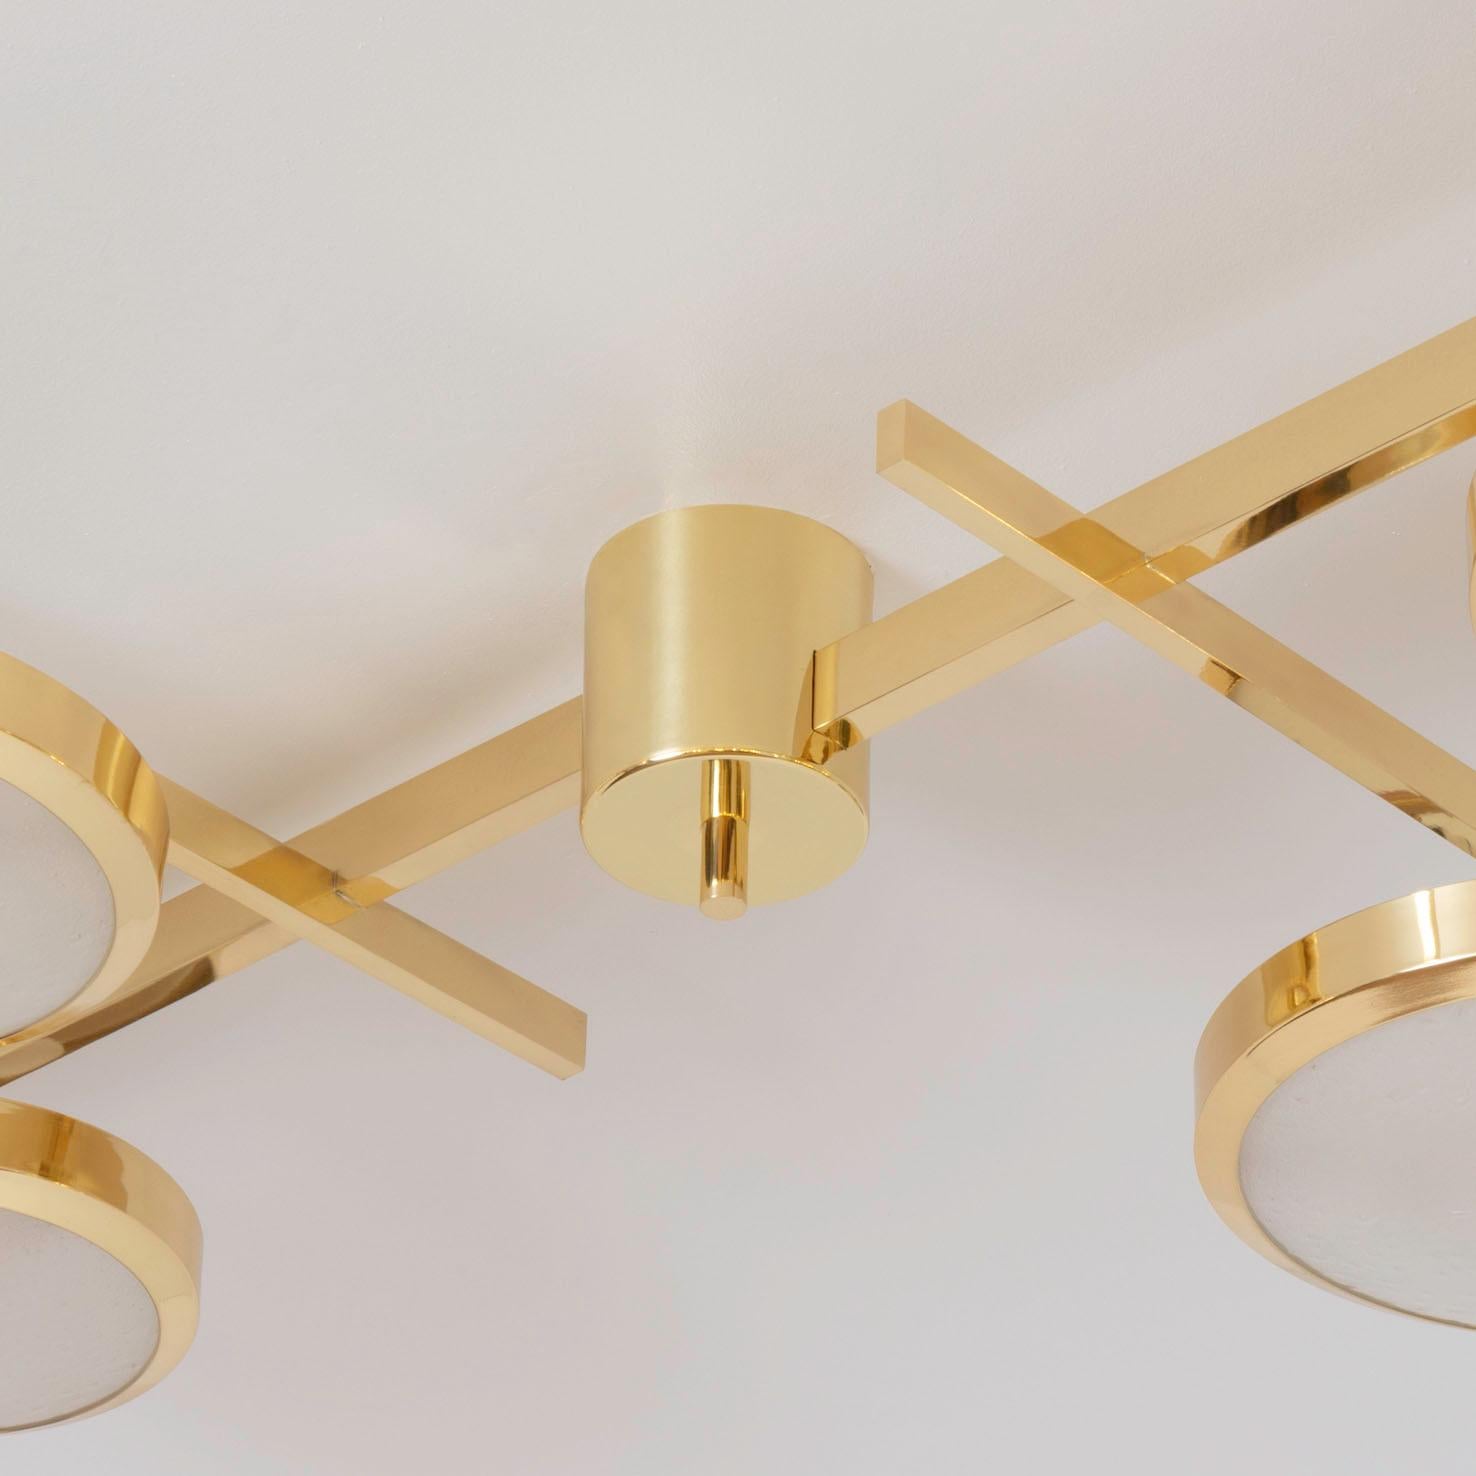 Tetrix Ceiling Light by Gaspare Asaro - Satin Brass Finish For Sale 5